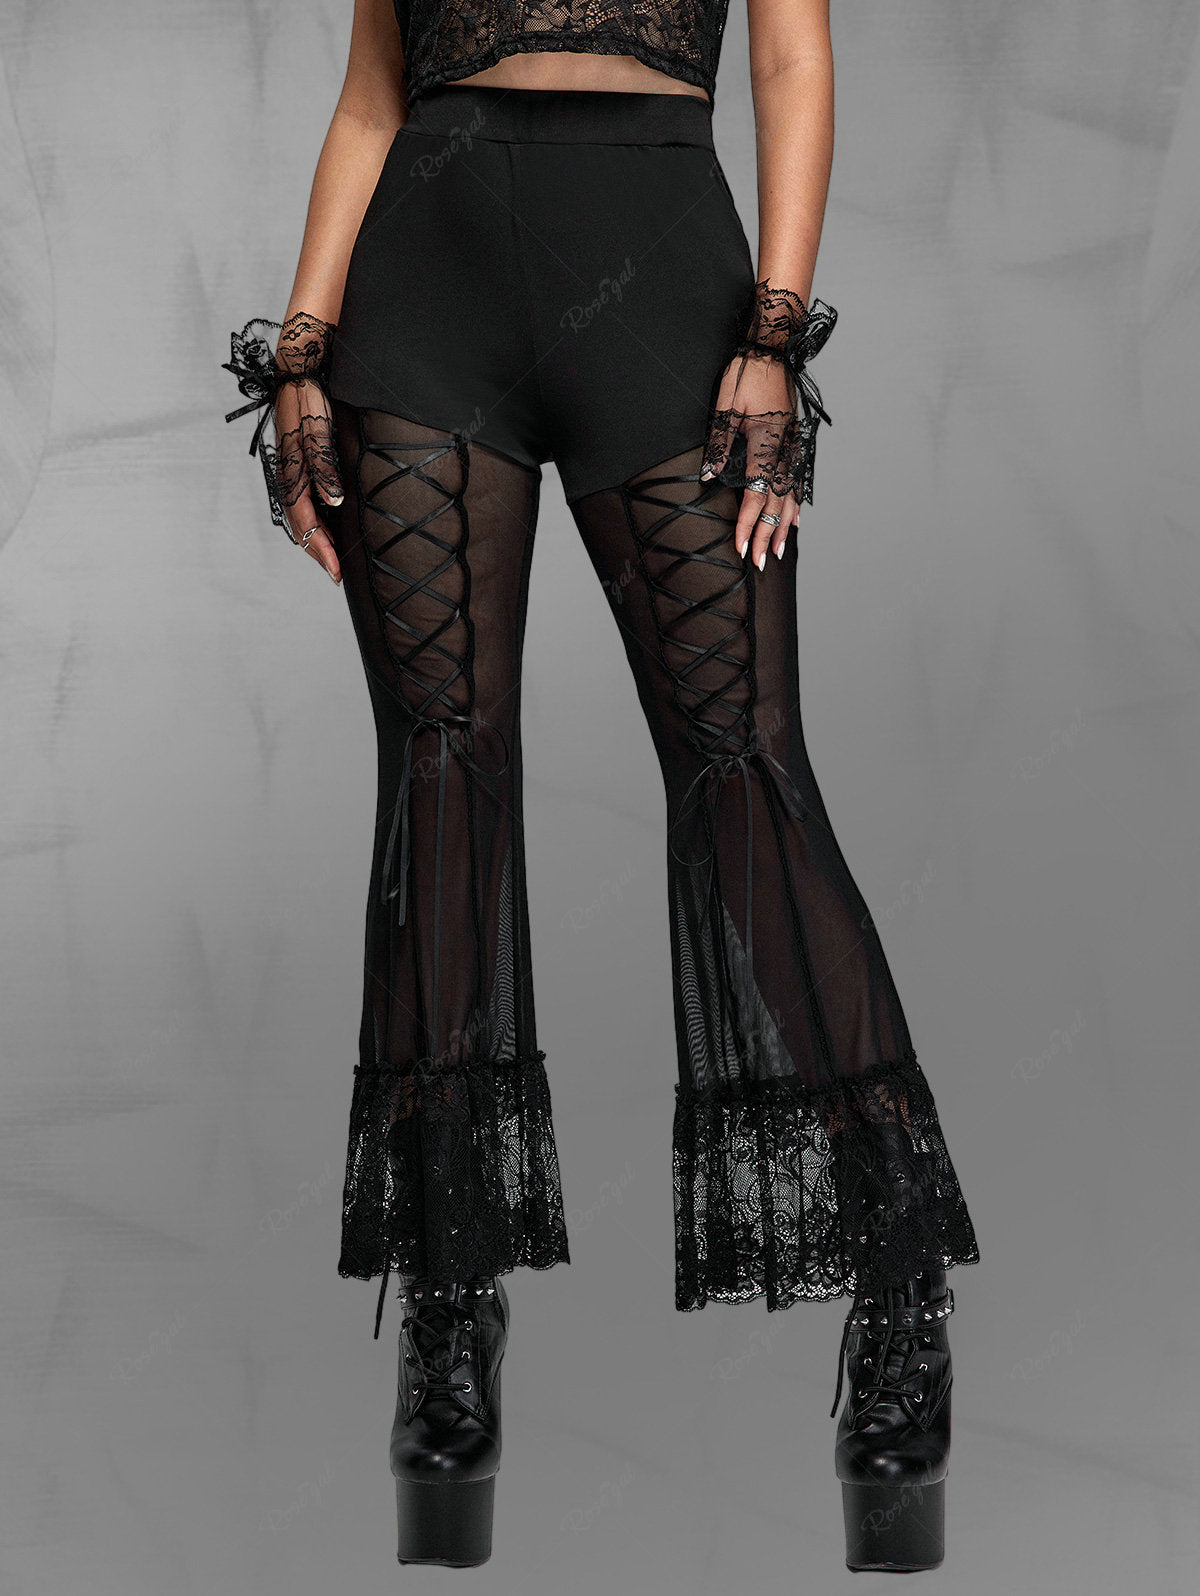 💗Johana Loves💗 Gothic See Through Mesh Panel Lace Lace-up Flare Pants